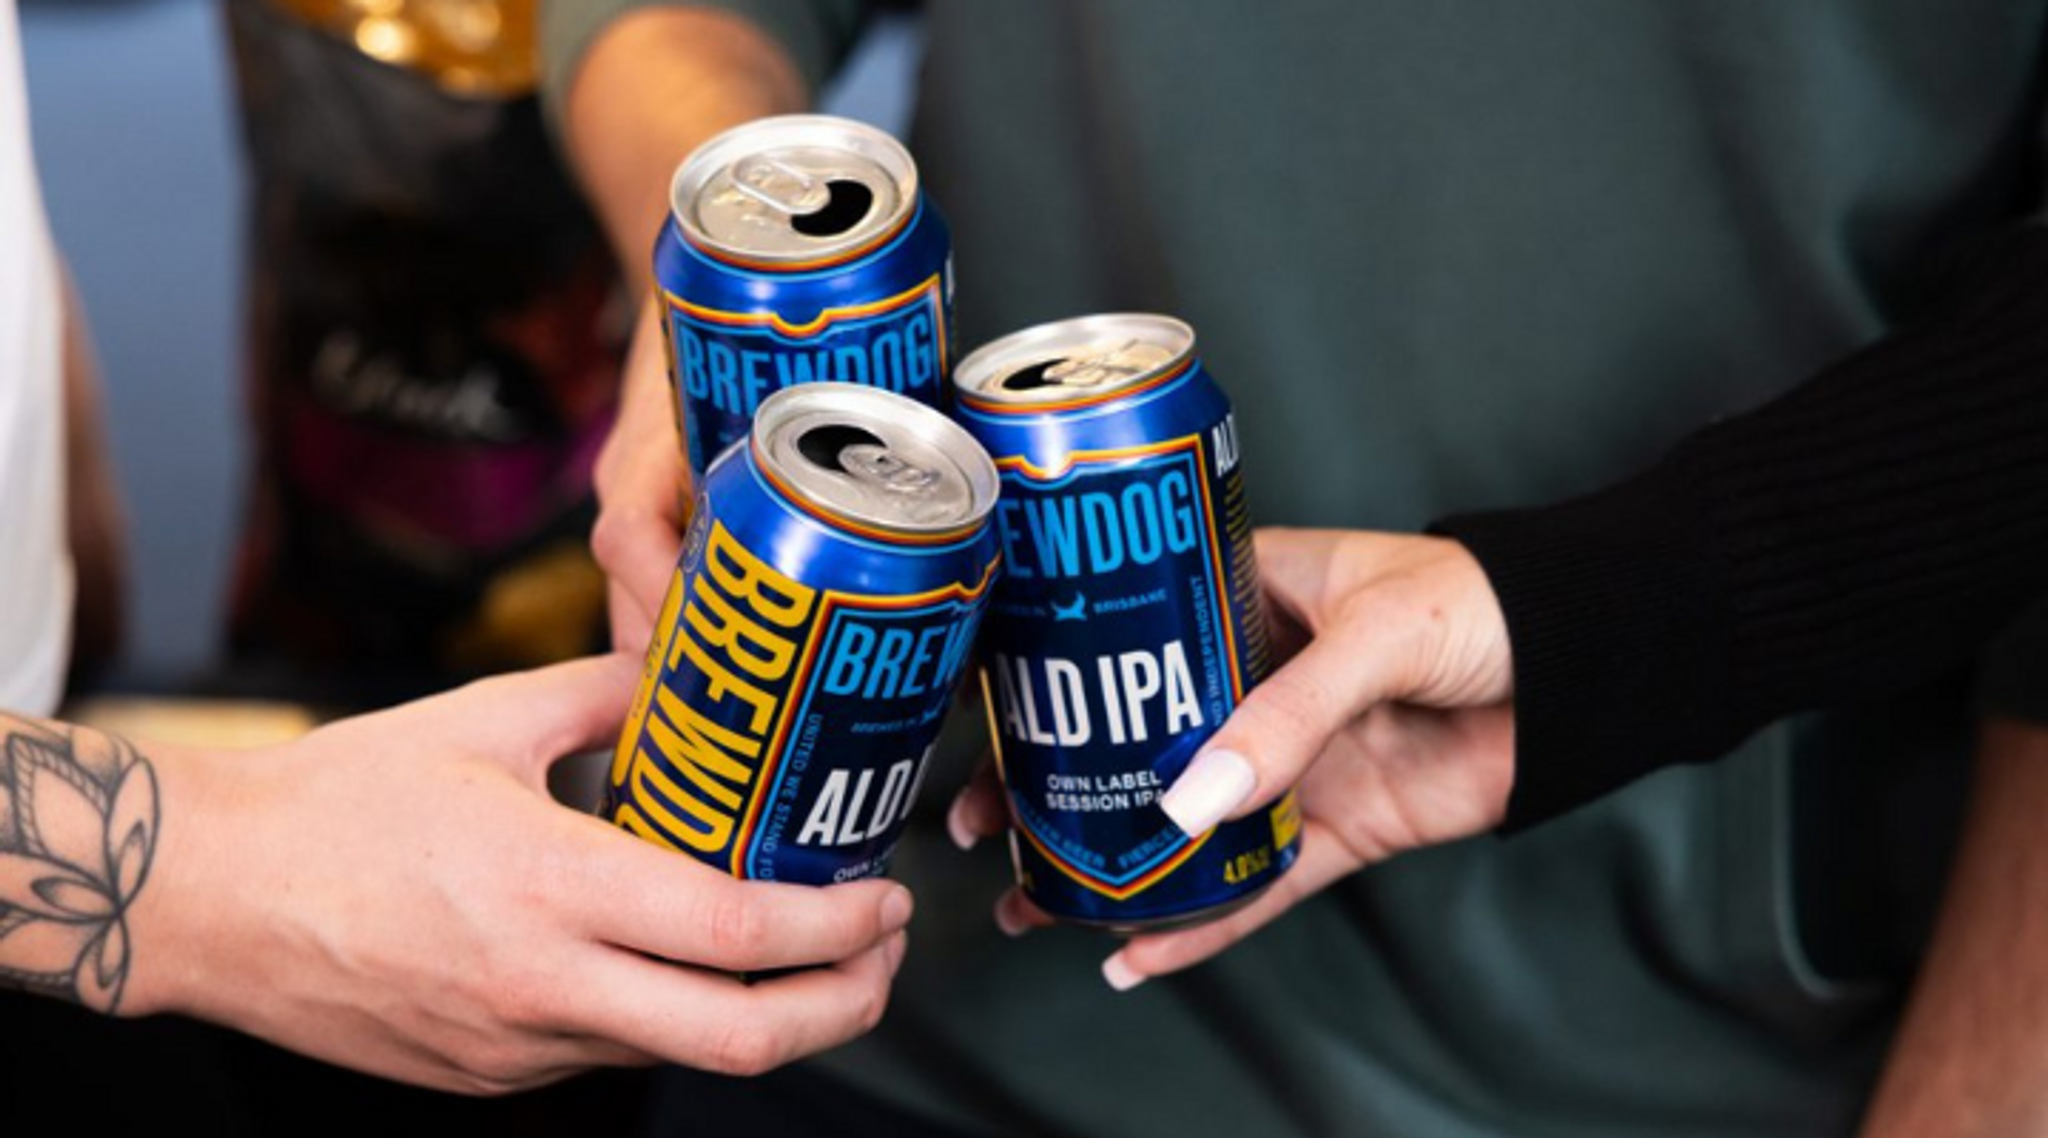 Aldi and BrewDog appeal to beer fans on a budget